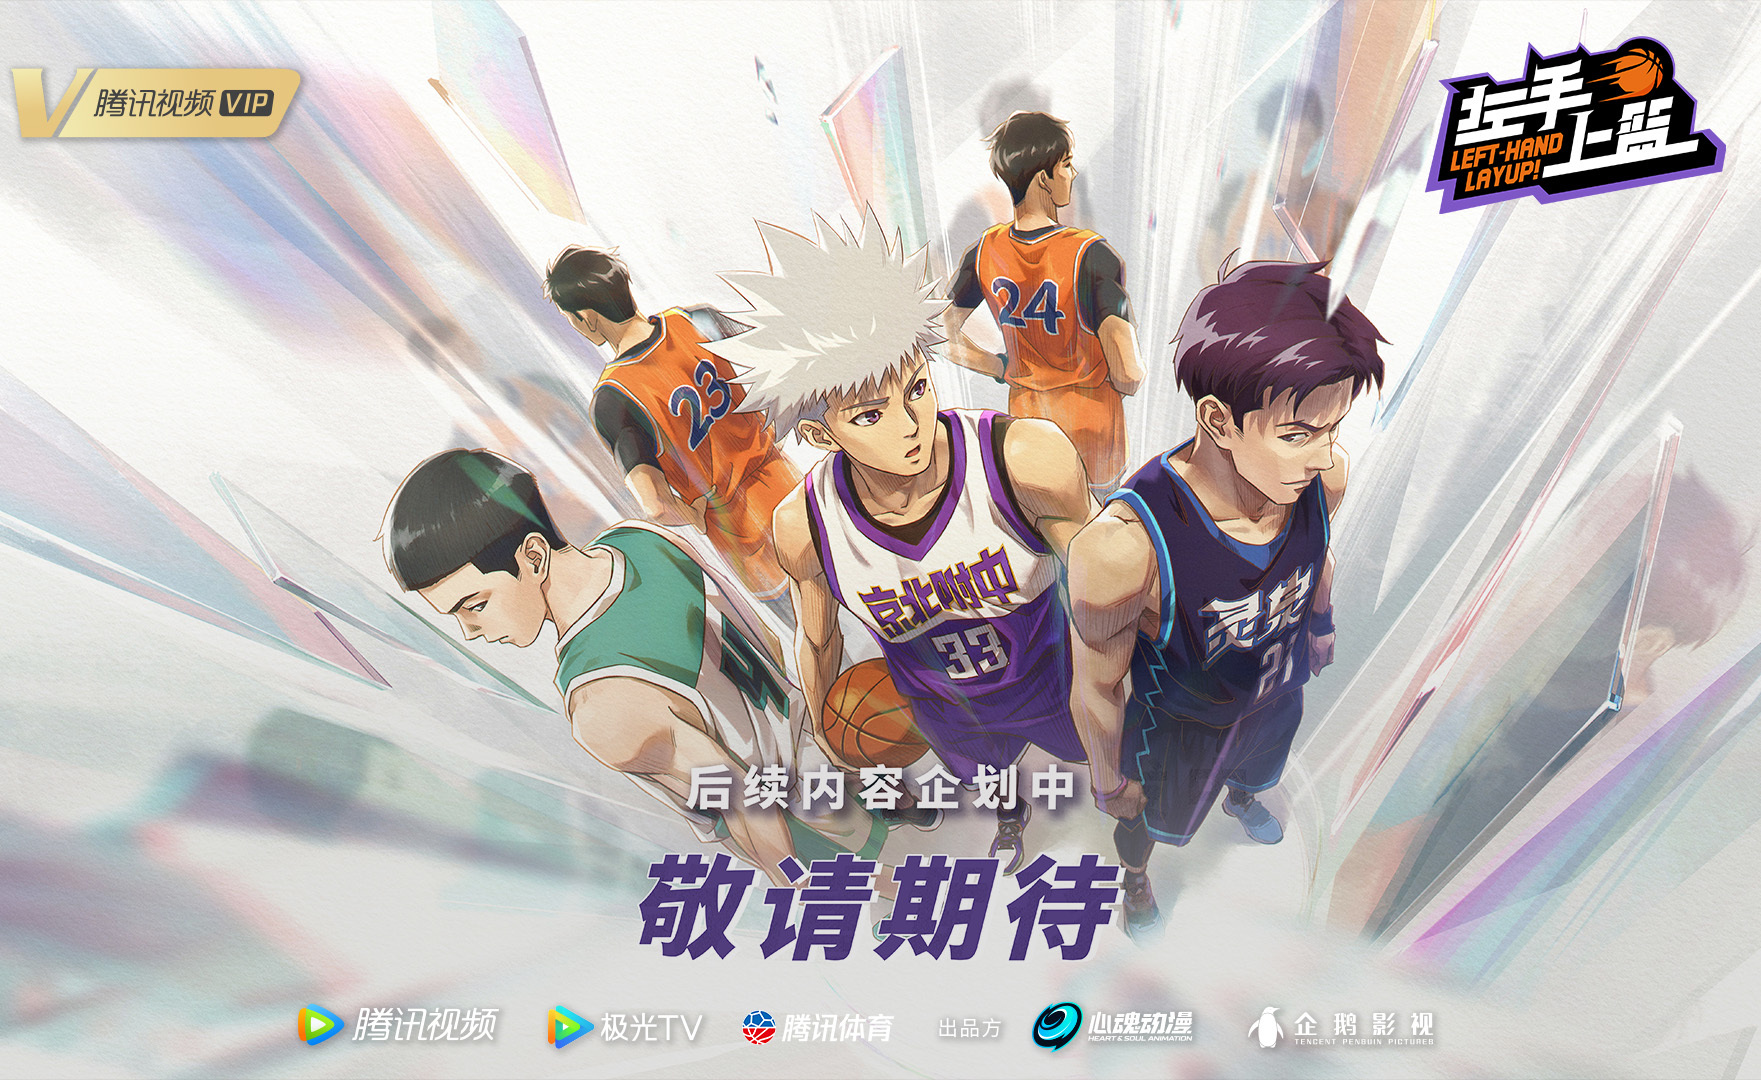 Theres a LeftHand Layup 5 Donghua Animation Film February 2023